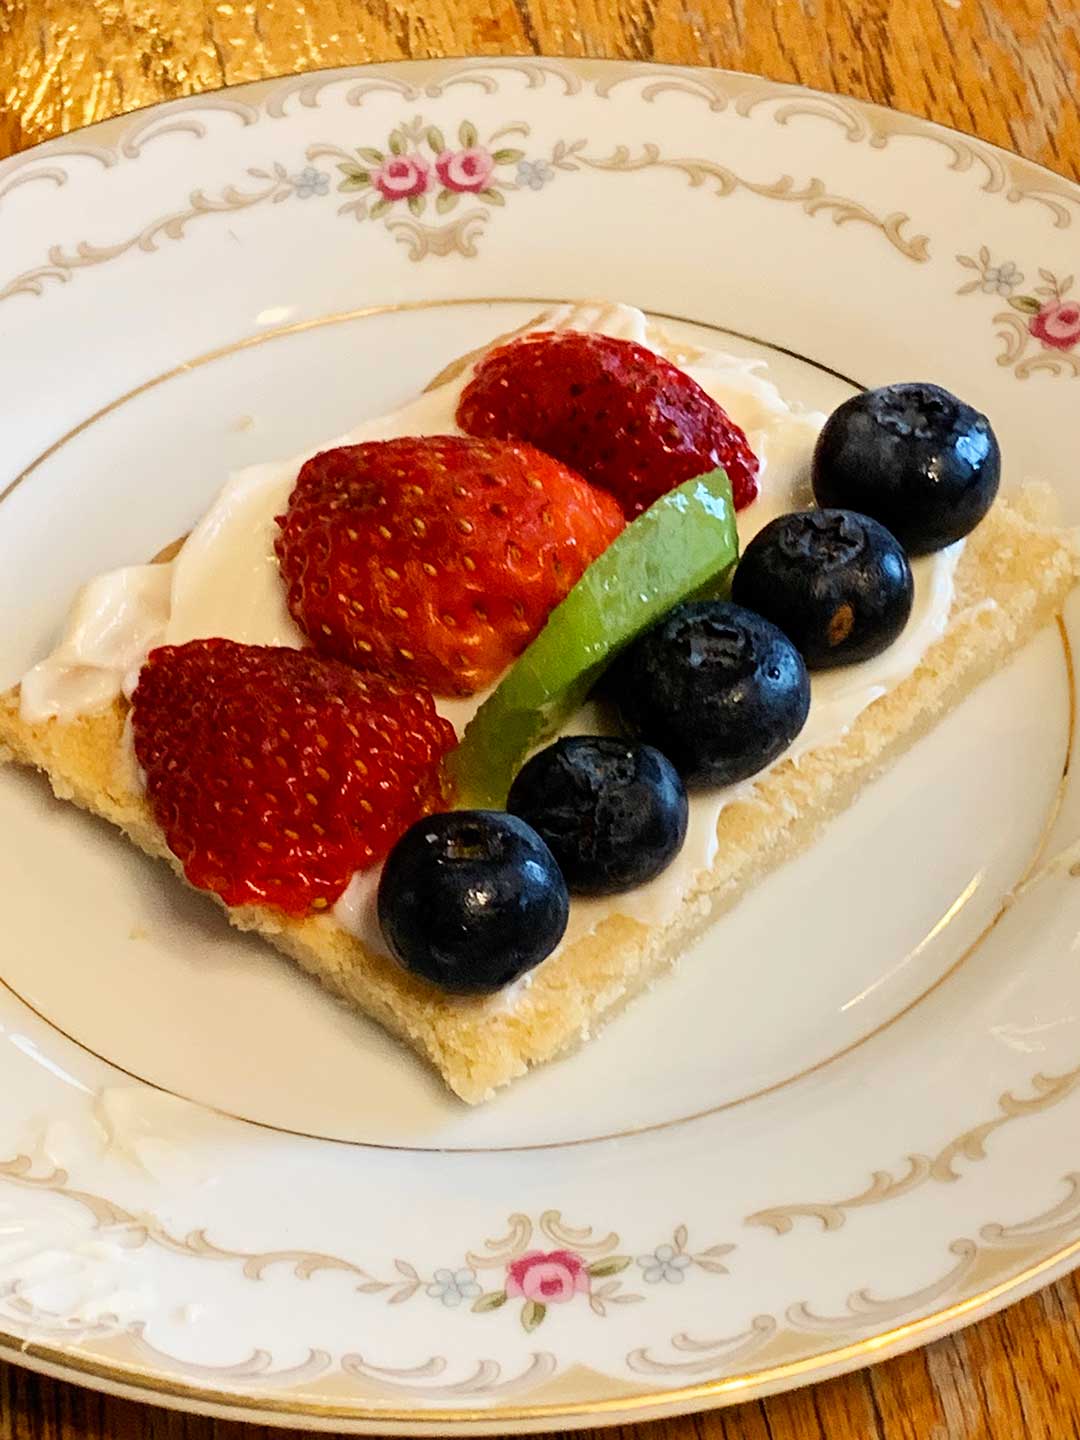 A piece of fruit pizza with frosting, strawberries, blueberries, and kiwi on a decorative plate..